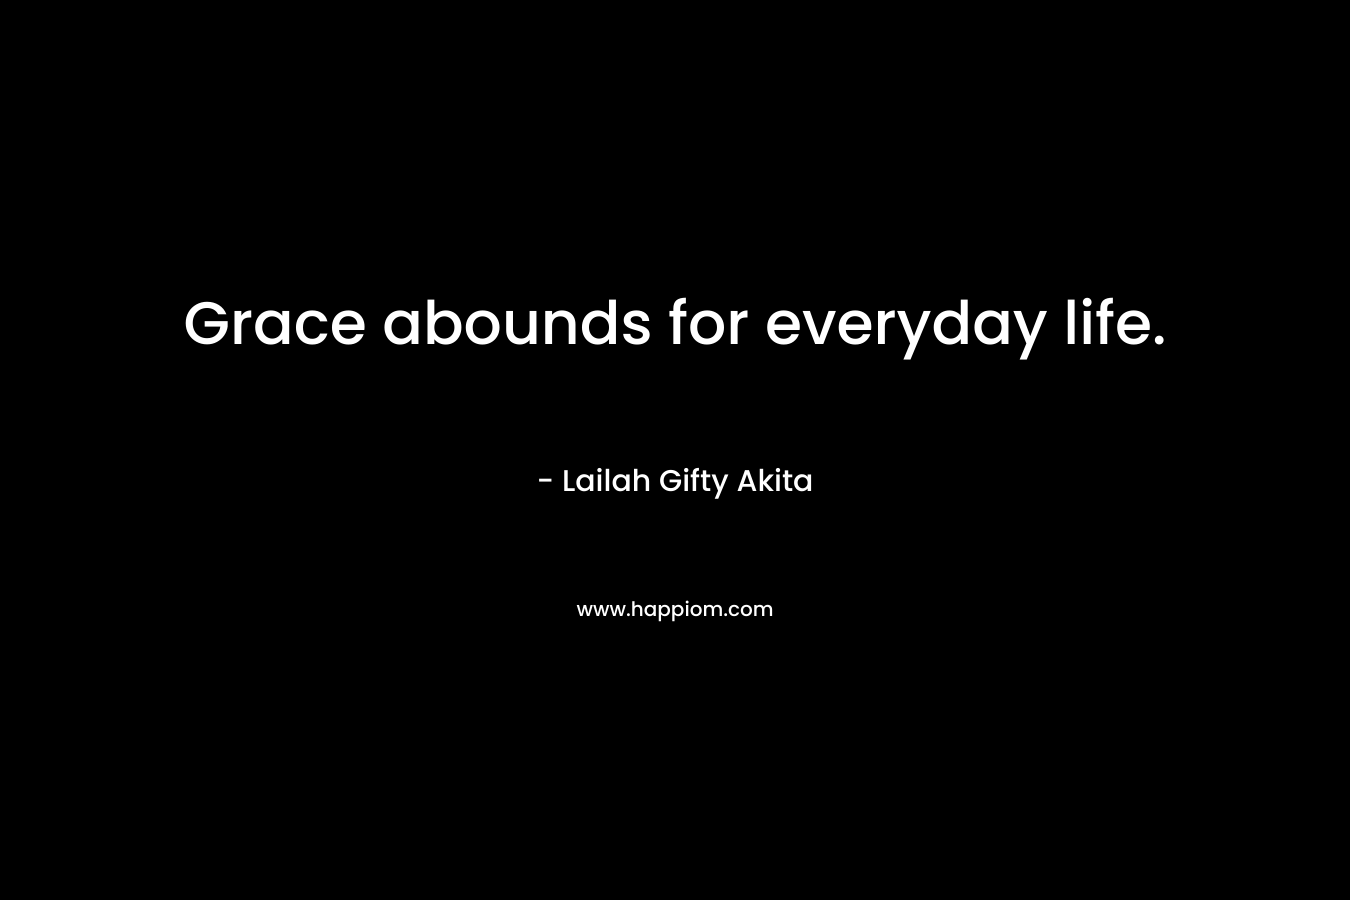 Grace abounds for everyday life. – Lailah Gifty Akita